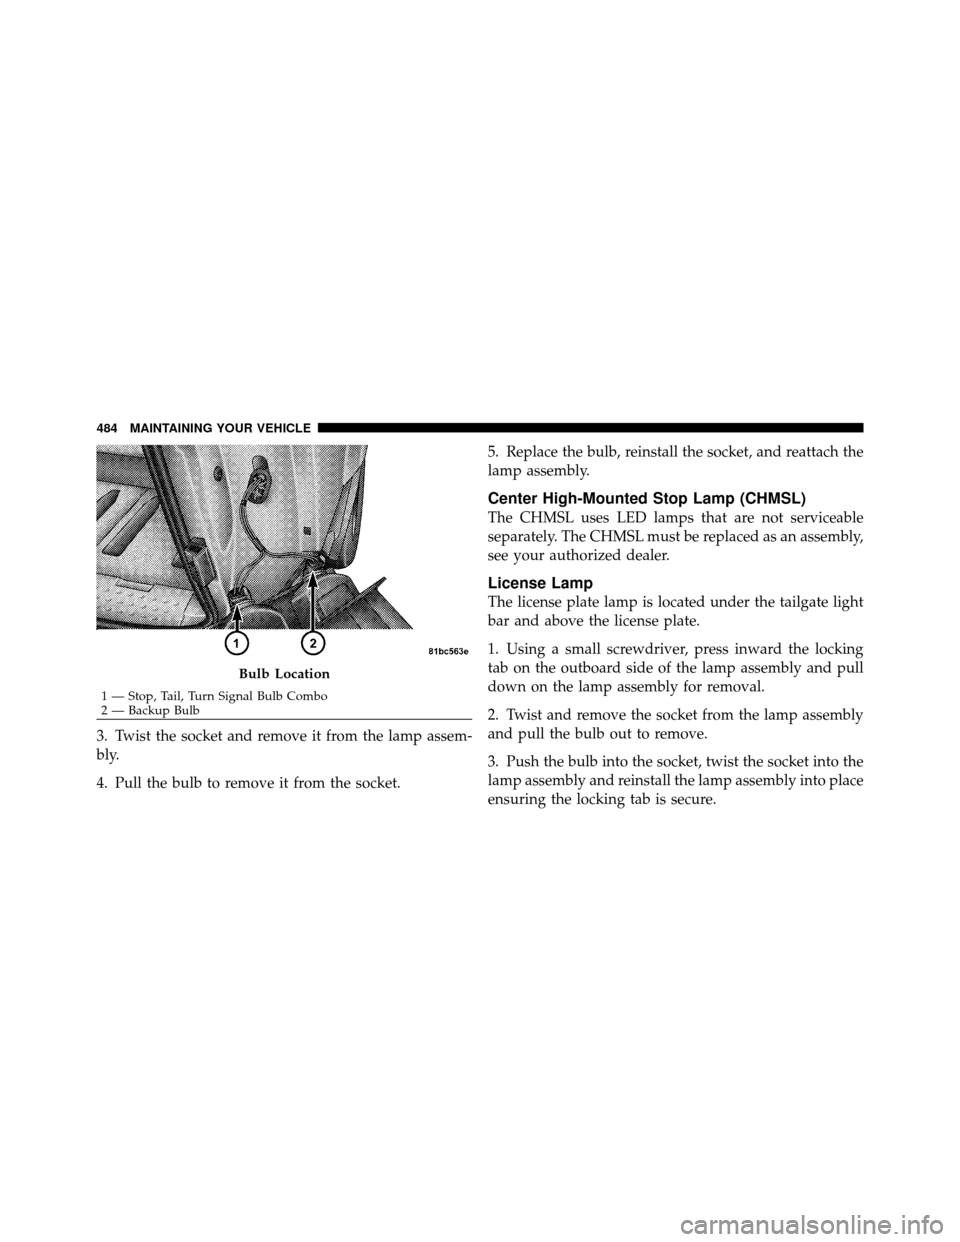 CHRYSLER TOWN AND COUNTRY 2010 5.G Owners Manual 3. Twist the socket and remove it from the lamp assem-
bly.
4. Pull the bulb to remove it from the socket.5. Replace the bulb, reinstall the socket, and reattach the
lamp assembly.
Center High-Mounted